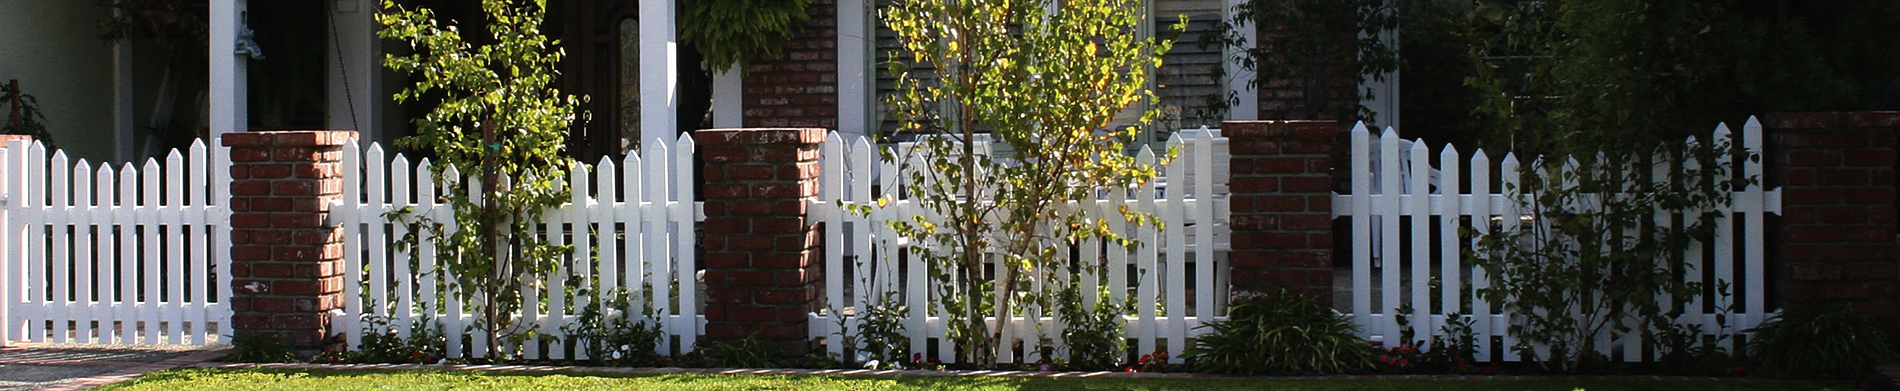 Etiquette Tips for Sharing a Fence with Your Neighbor